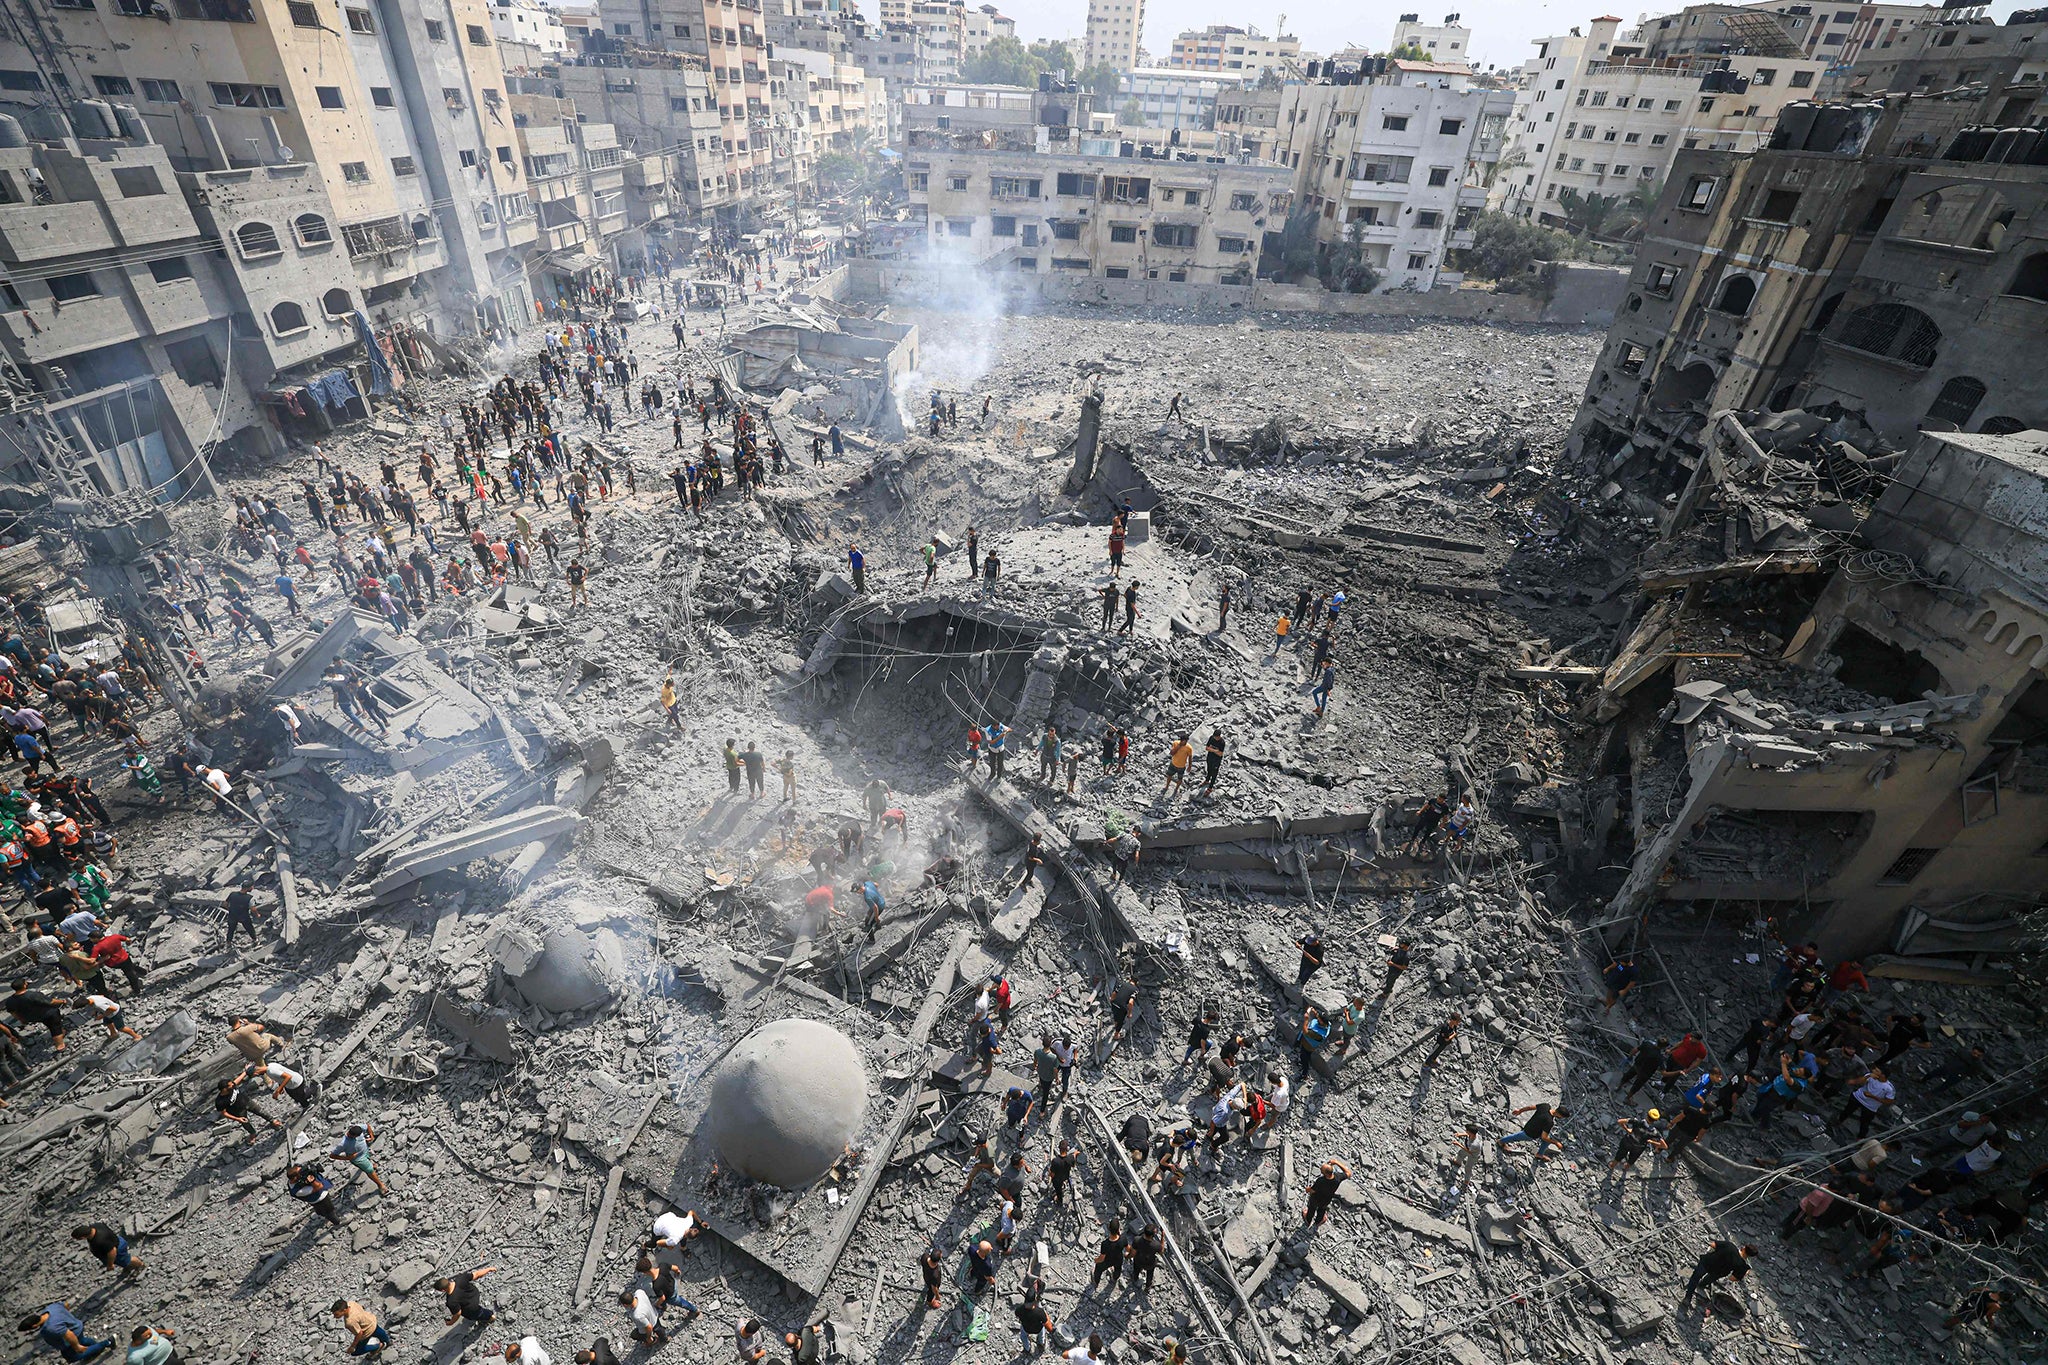 Gaza has been hit by hundreds of strikes by Israel